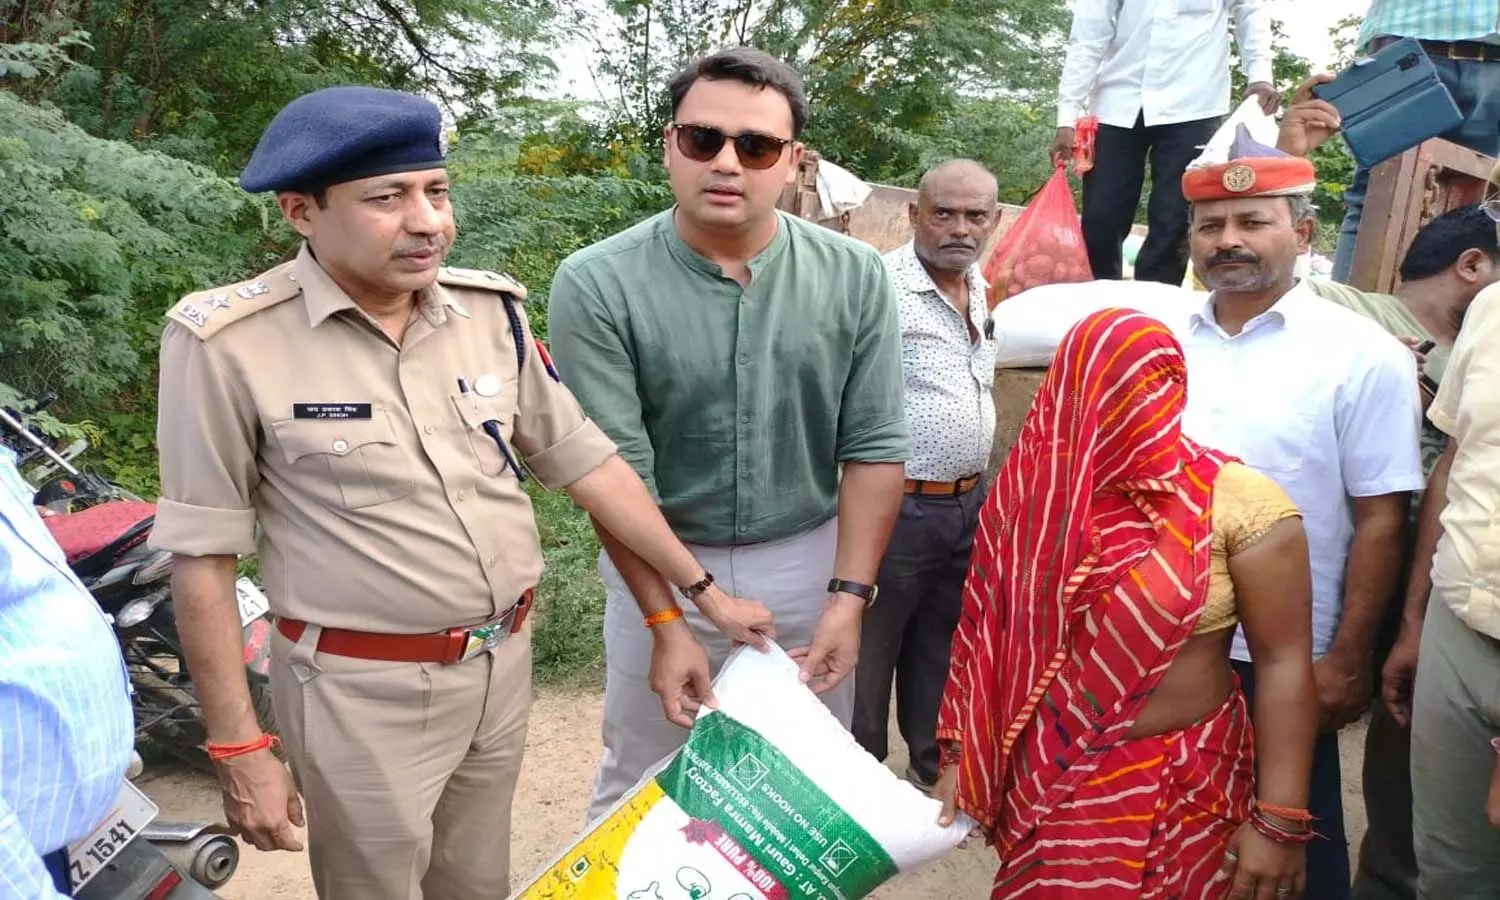 DM SSP is delivering relief material to flood affected areas in Etawah, administration on alert mode